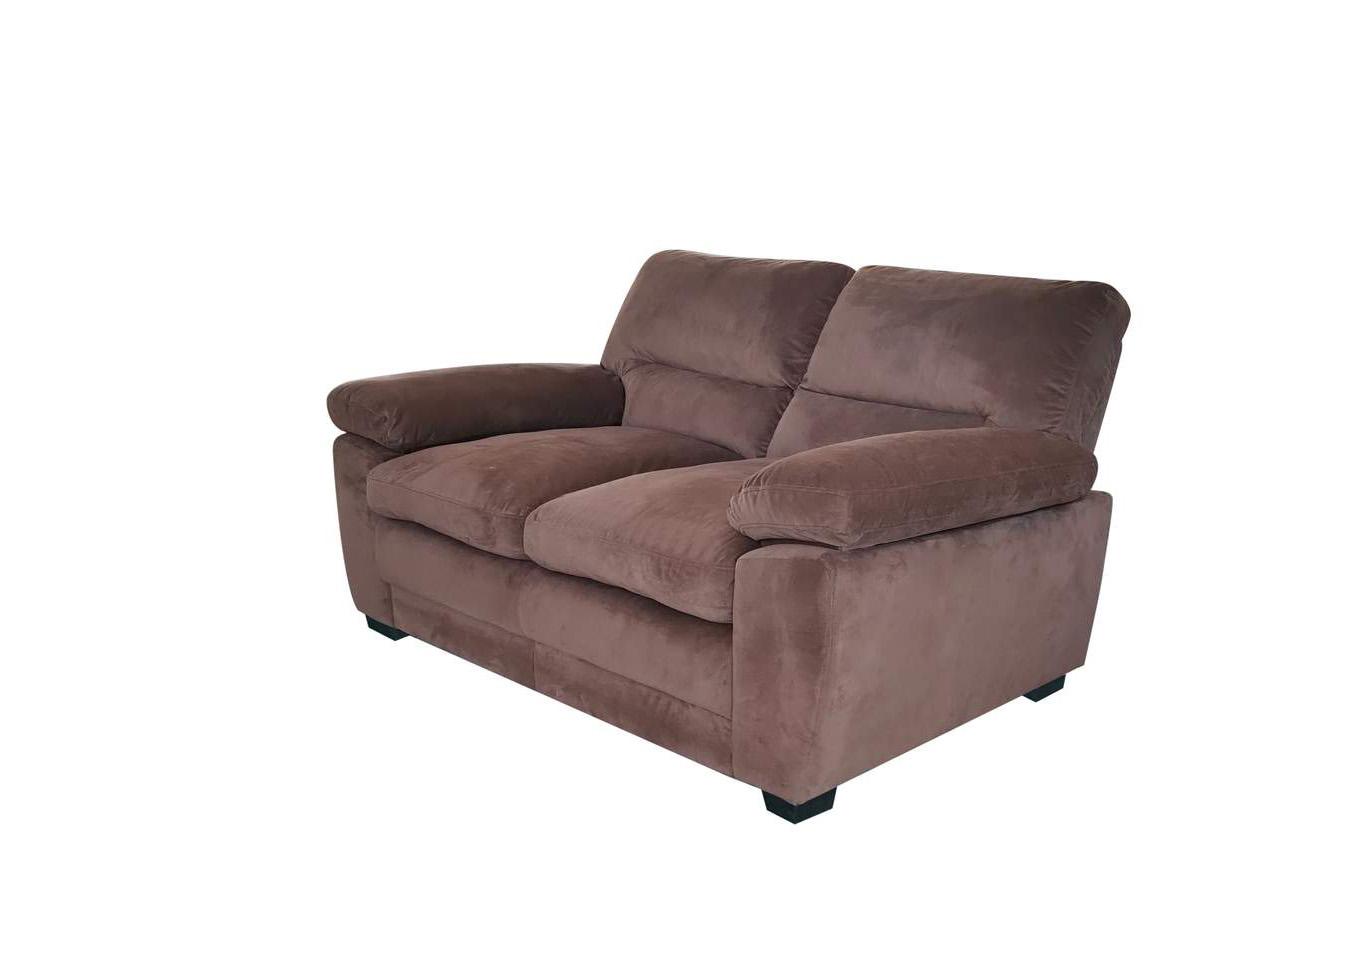 Contemporary, Modern Loveseat MAXX GHF-808857563484 in Brown Fabric